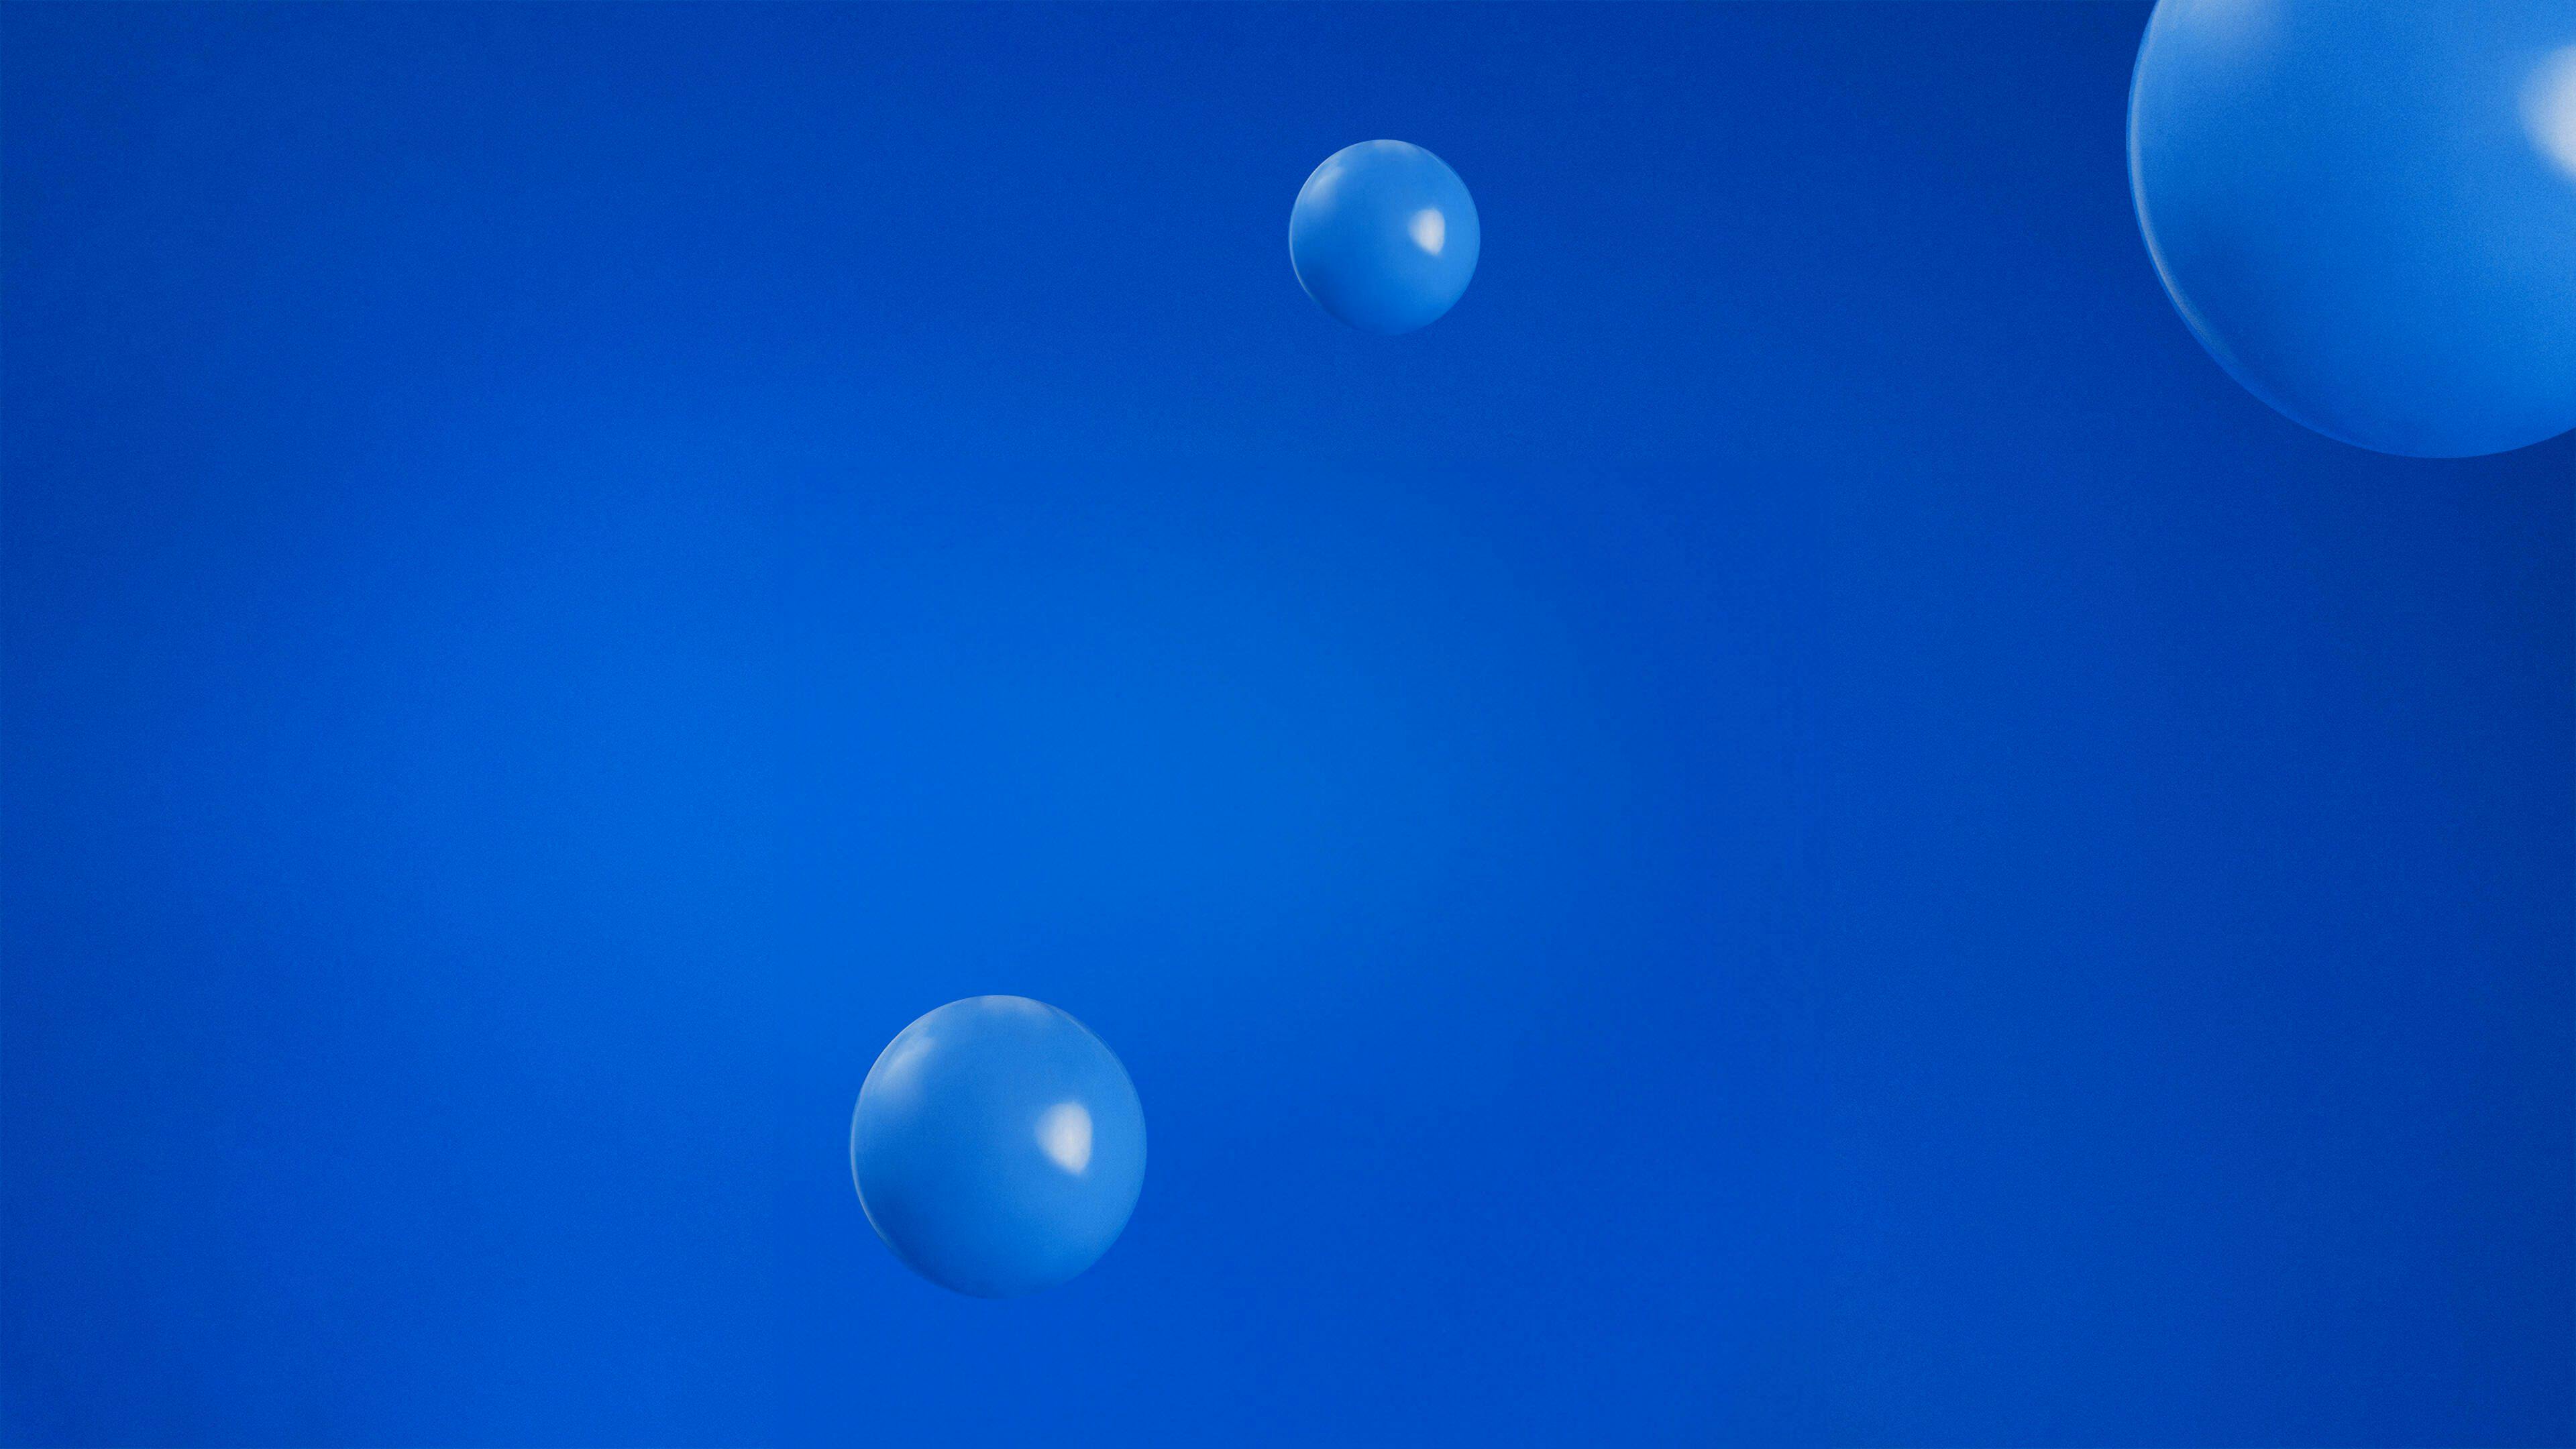 A smooth and subtle background image featuring blue, spherical balloons